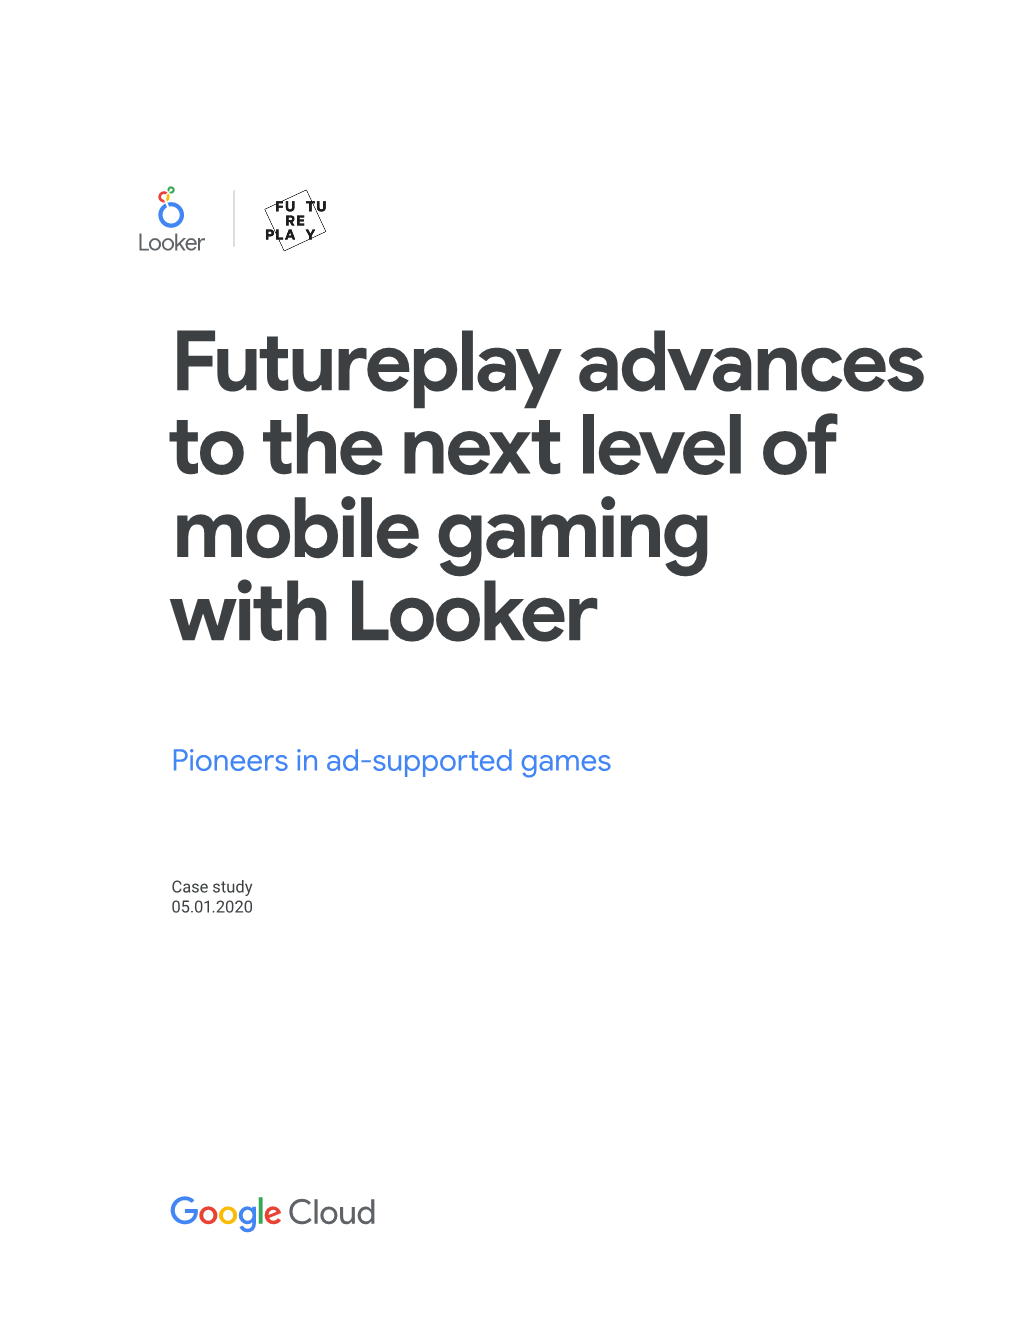 Futureplay Advances to the Next Level of Mobile Gaming with Looker